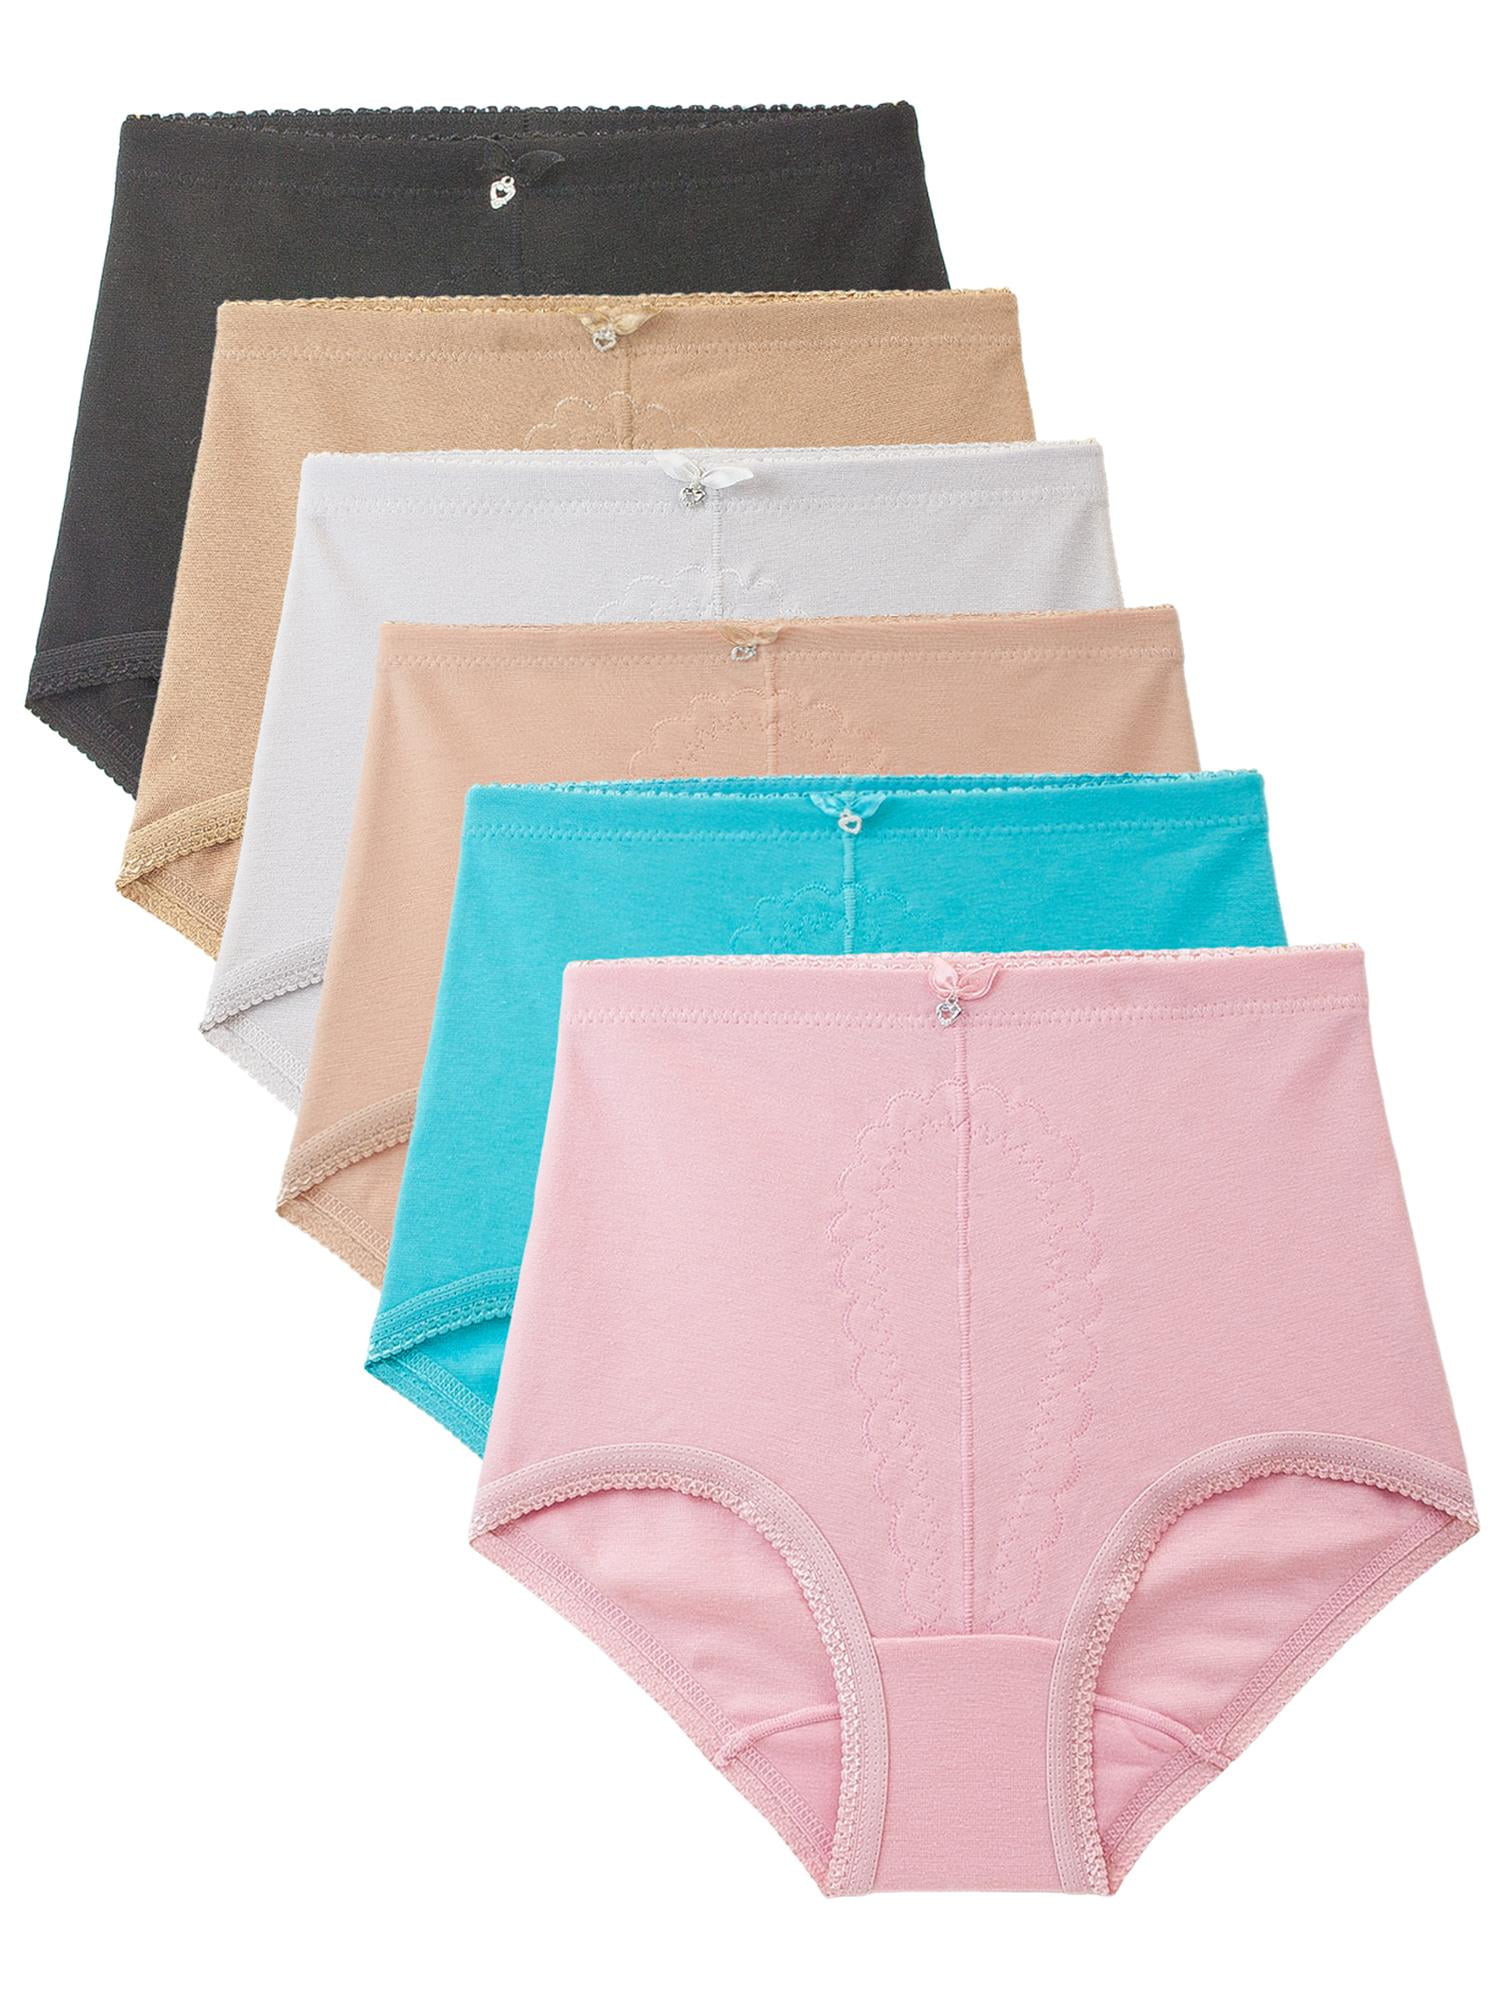 Barbra Women's Panties Light Tummy Control Brief Small to Plus Sizes  Multi-Pack 